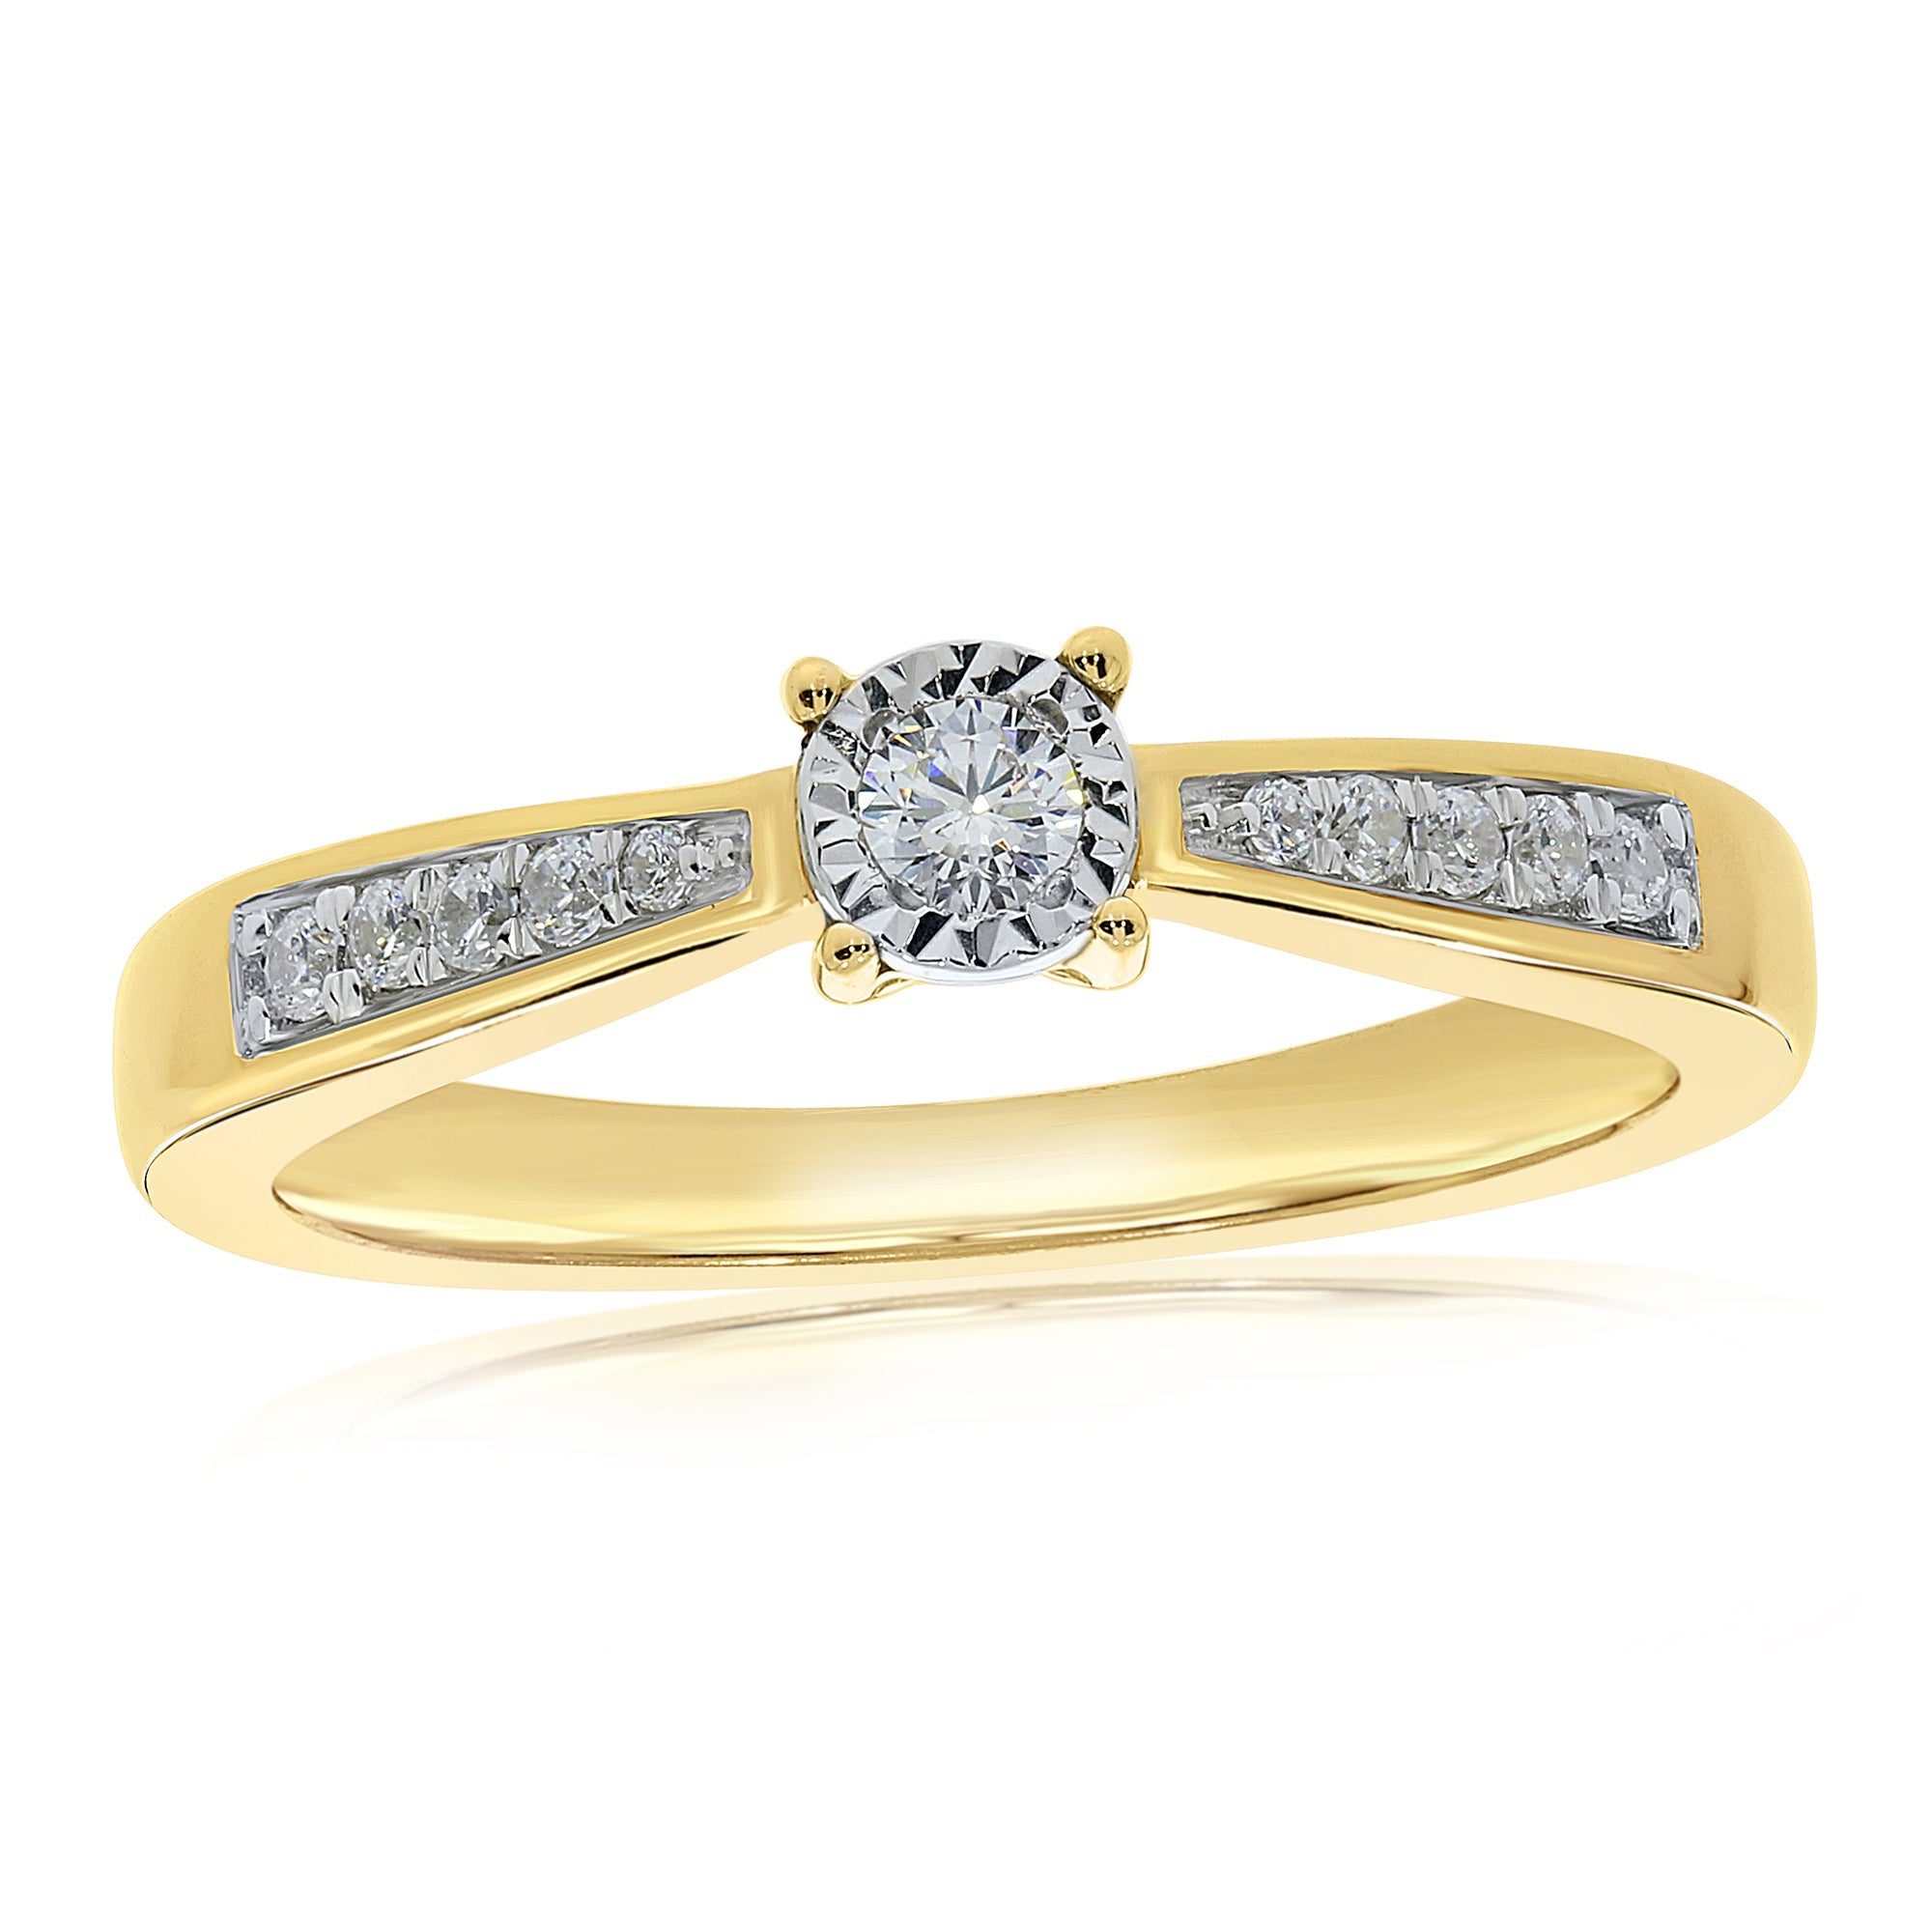 9ct gold single stone miracle plate diamond ring with diamond set shoulders 0.10ct